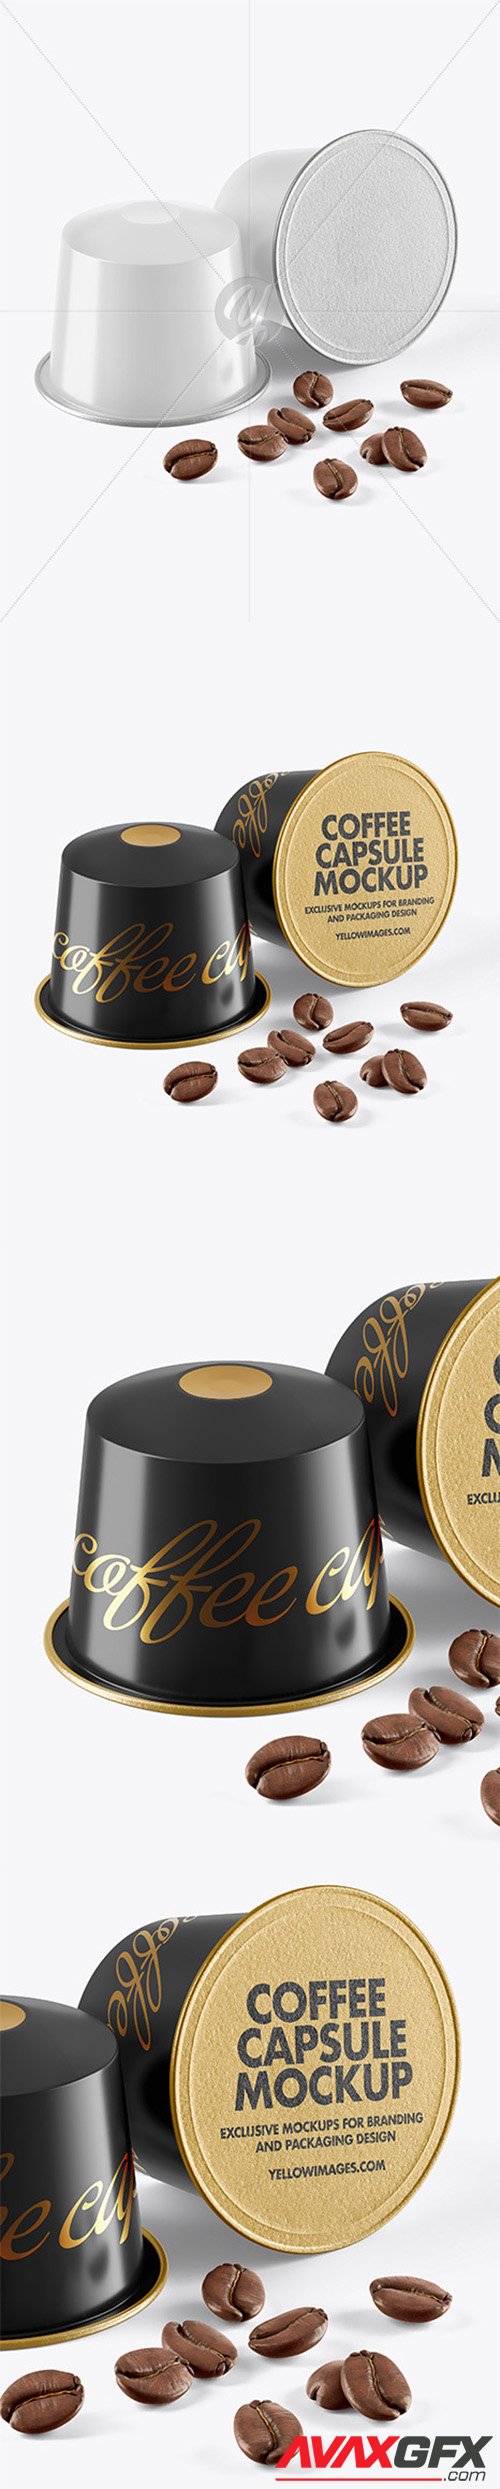 Download Two Coffee Capsules With Coffee Beans Mockup 59443 Avaxgfx All Downloads That You Need In One Place Graphic From Nitroflare Rapidgator